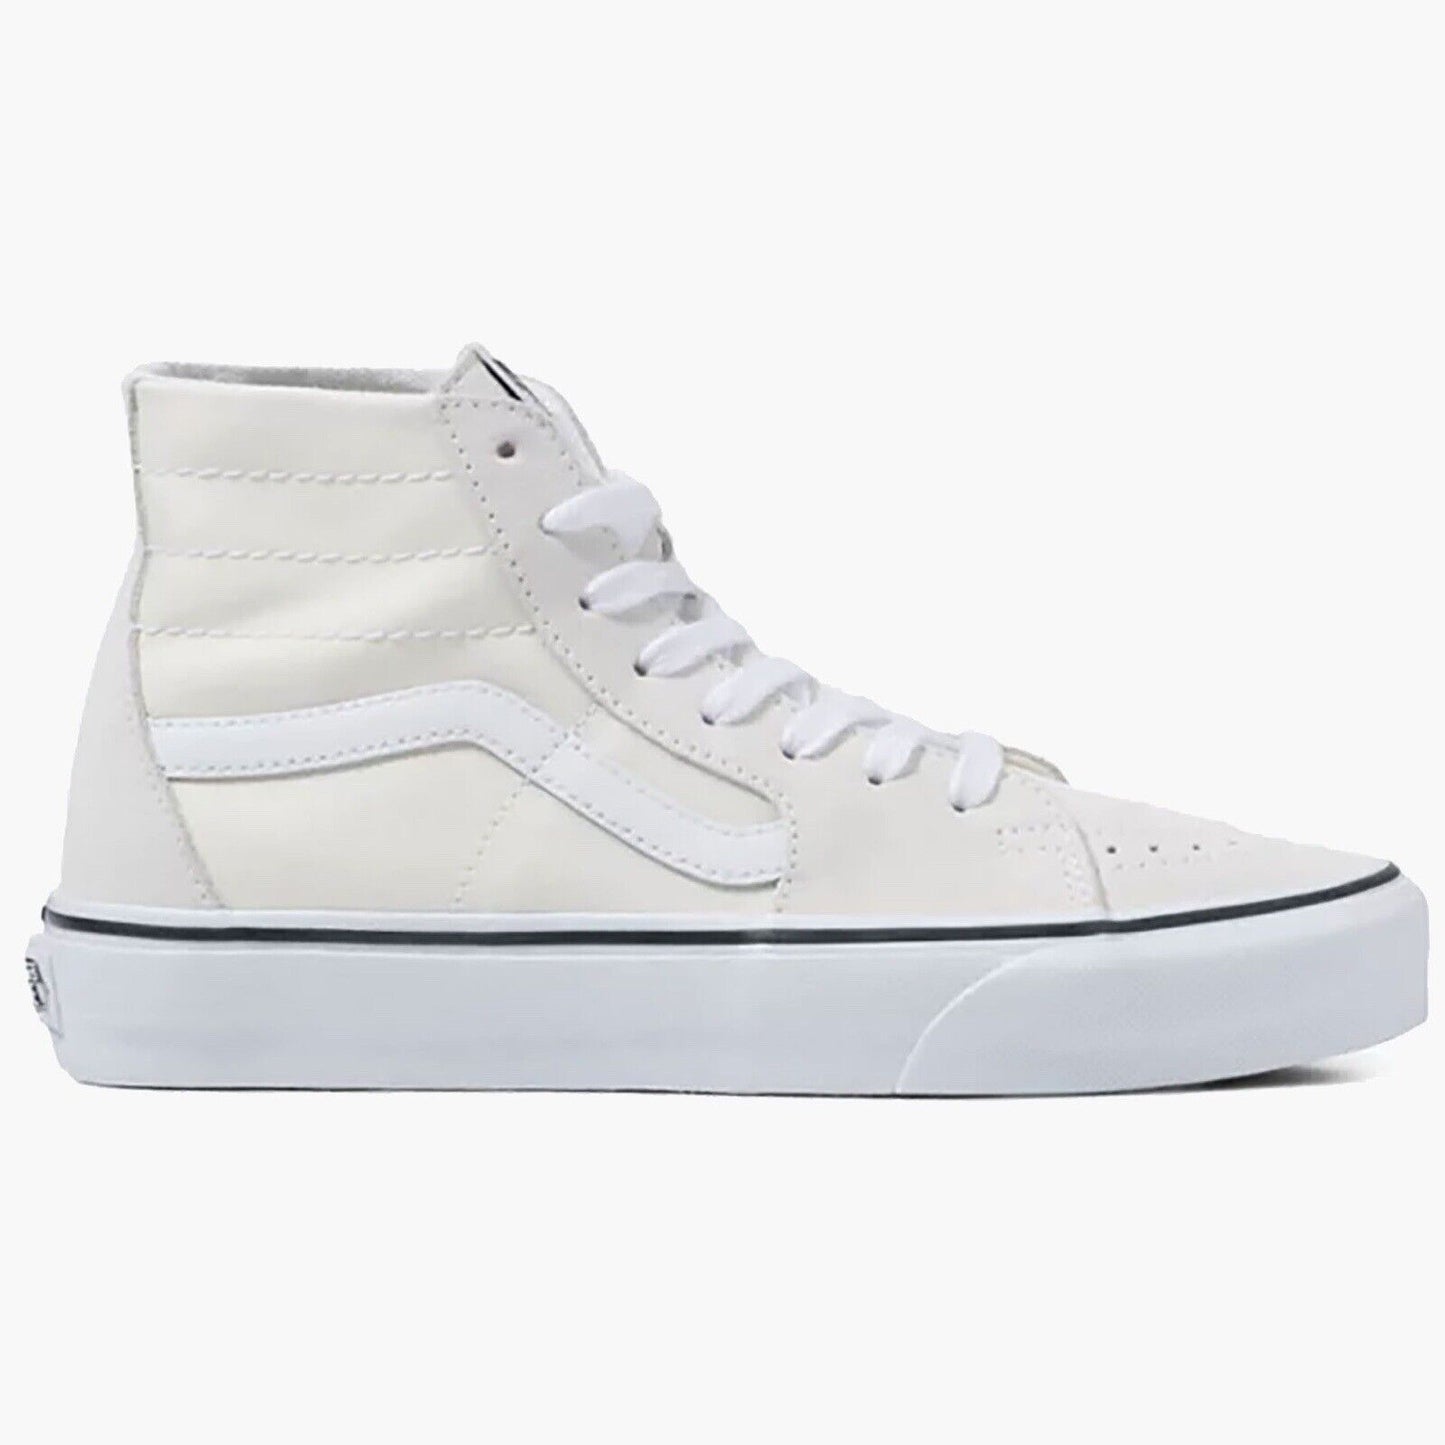 Vans Sk8-Hi Tapered Suede/Canvas Marshmallow VN0A4U16FS8 Women's Size 8